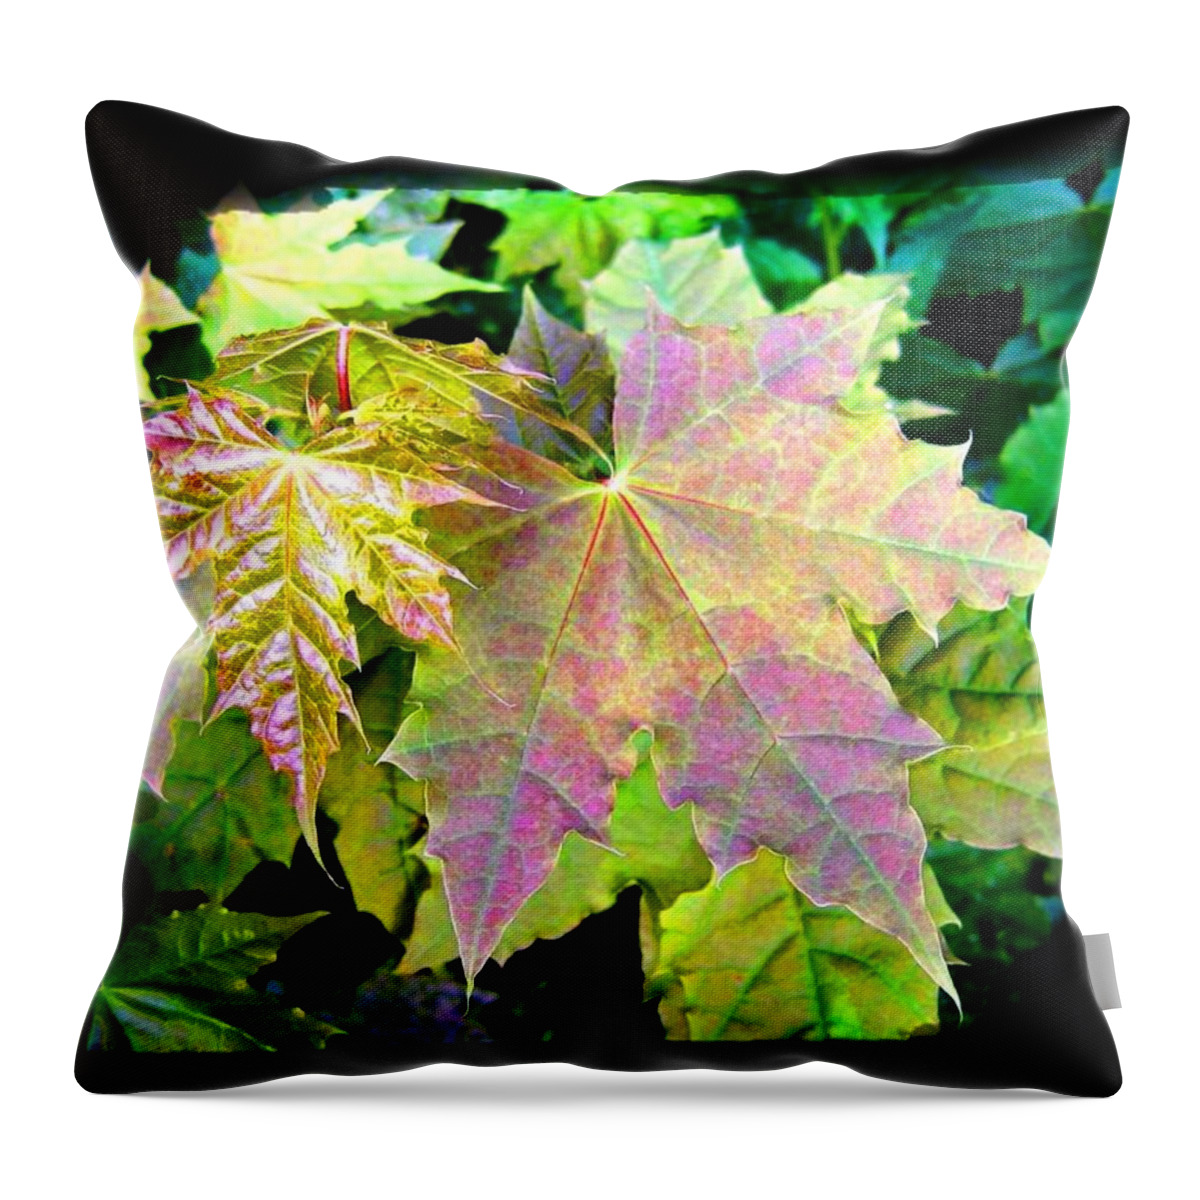 #lushspringfoliage Throw Pillow featuring the mixed media Lush Spring Foliage by Will Borden